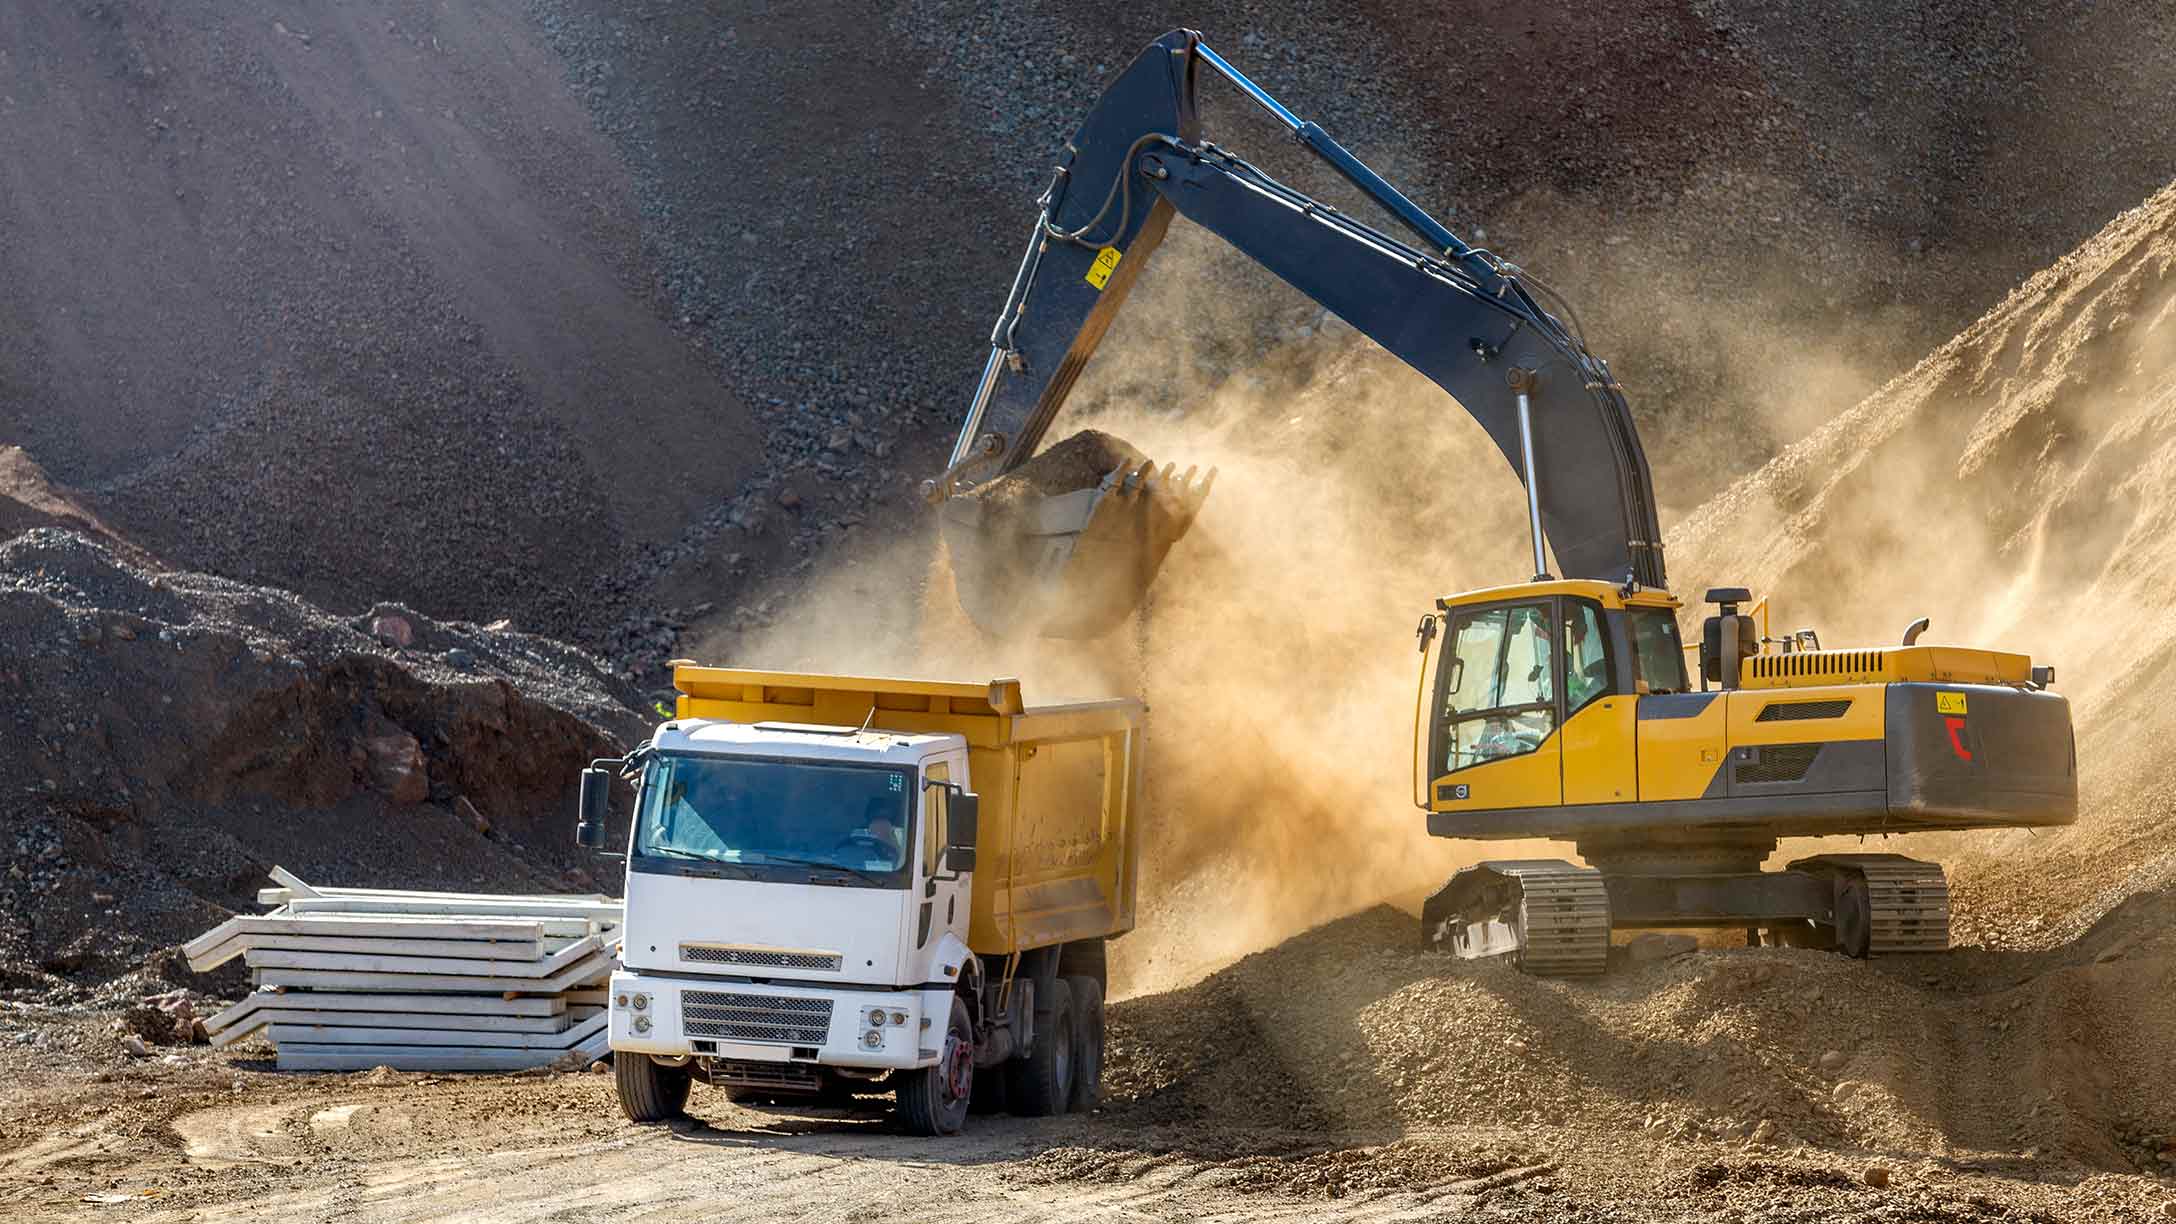 A construction truck and excavator at a construction site